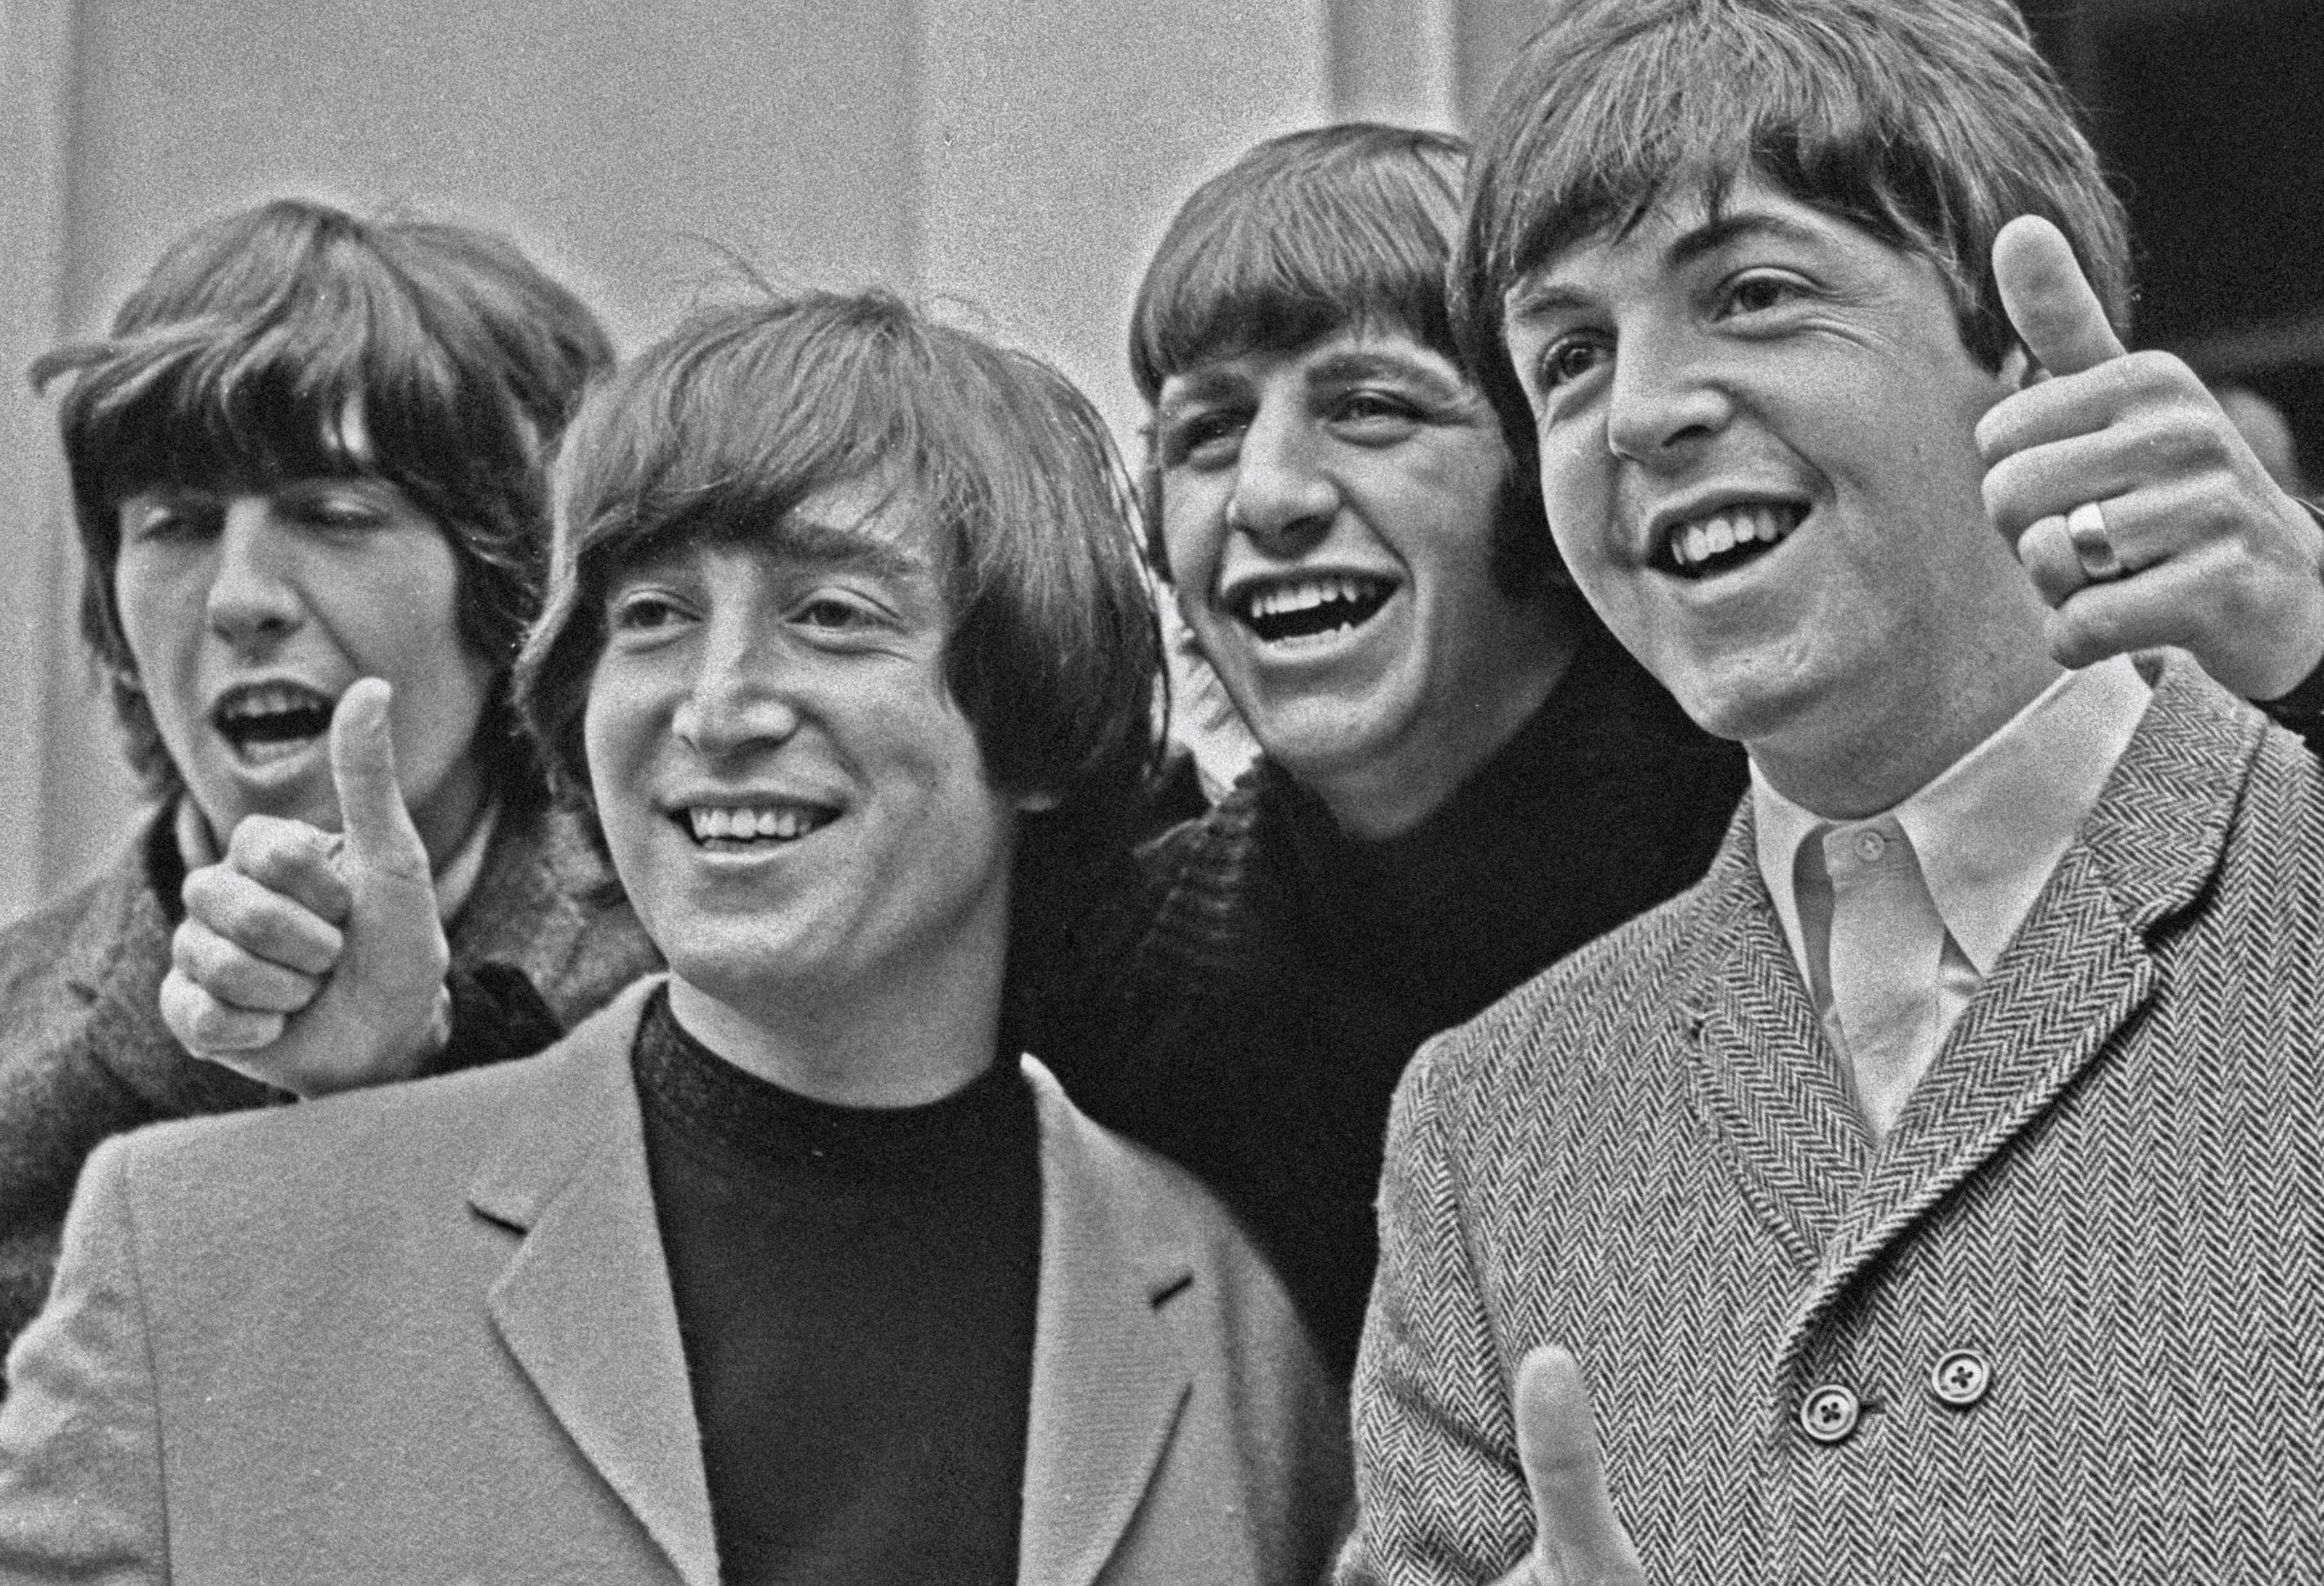 The Beatles in black-and-white during the "Here Comes the Sun"